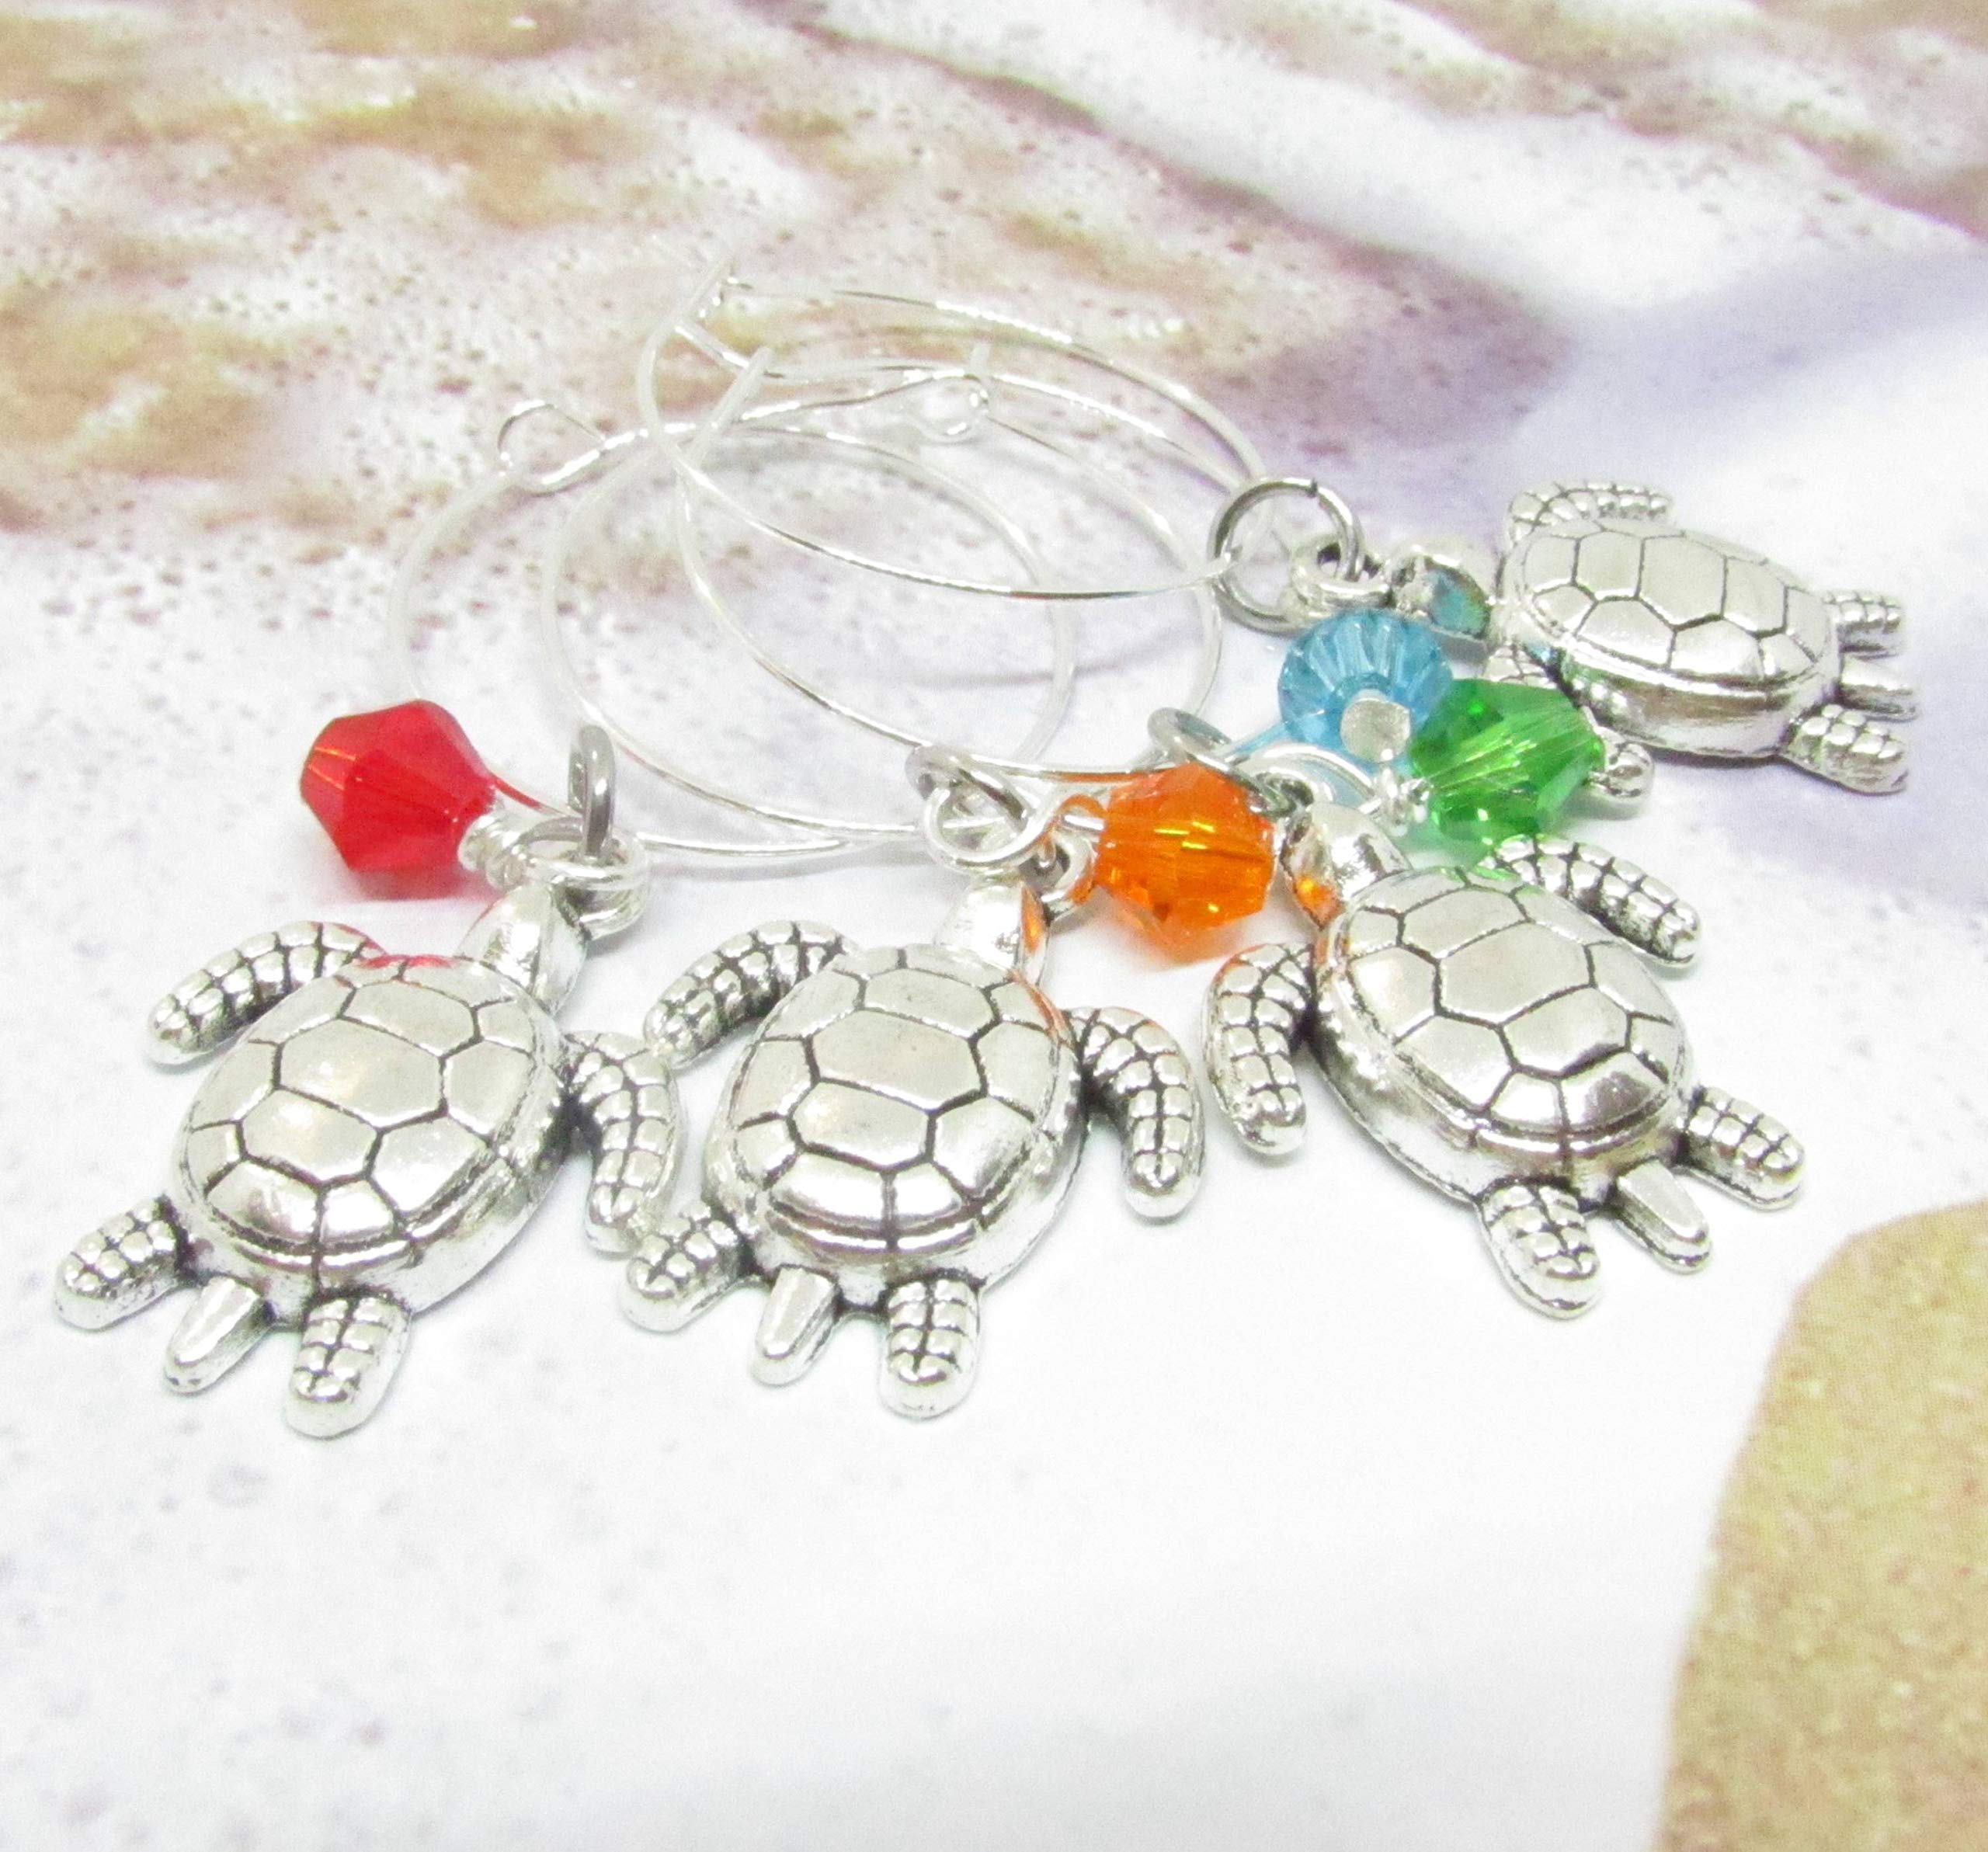 Set of 4 Sea Turtle Wine Glass Charms - Gift for the Wine Lover - Wine Gifts for Mom